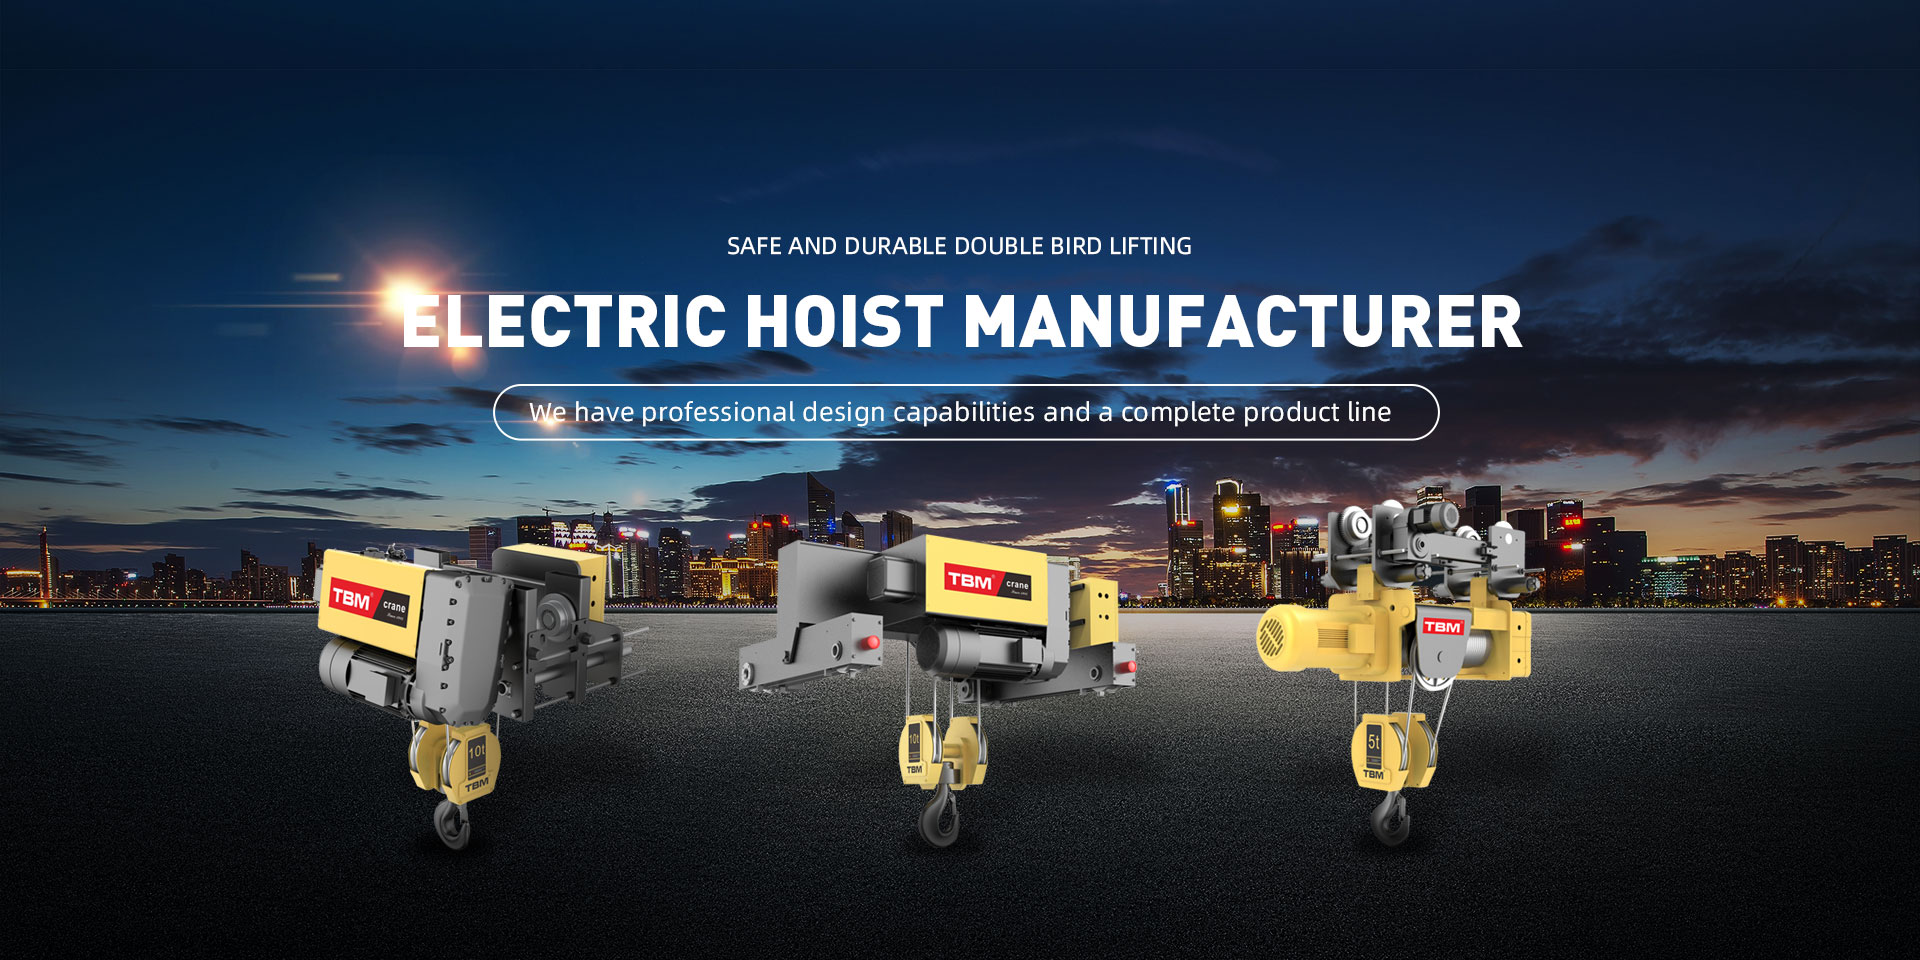 The use and management of wholesale electric hoist